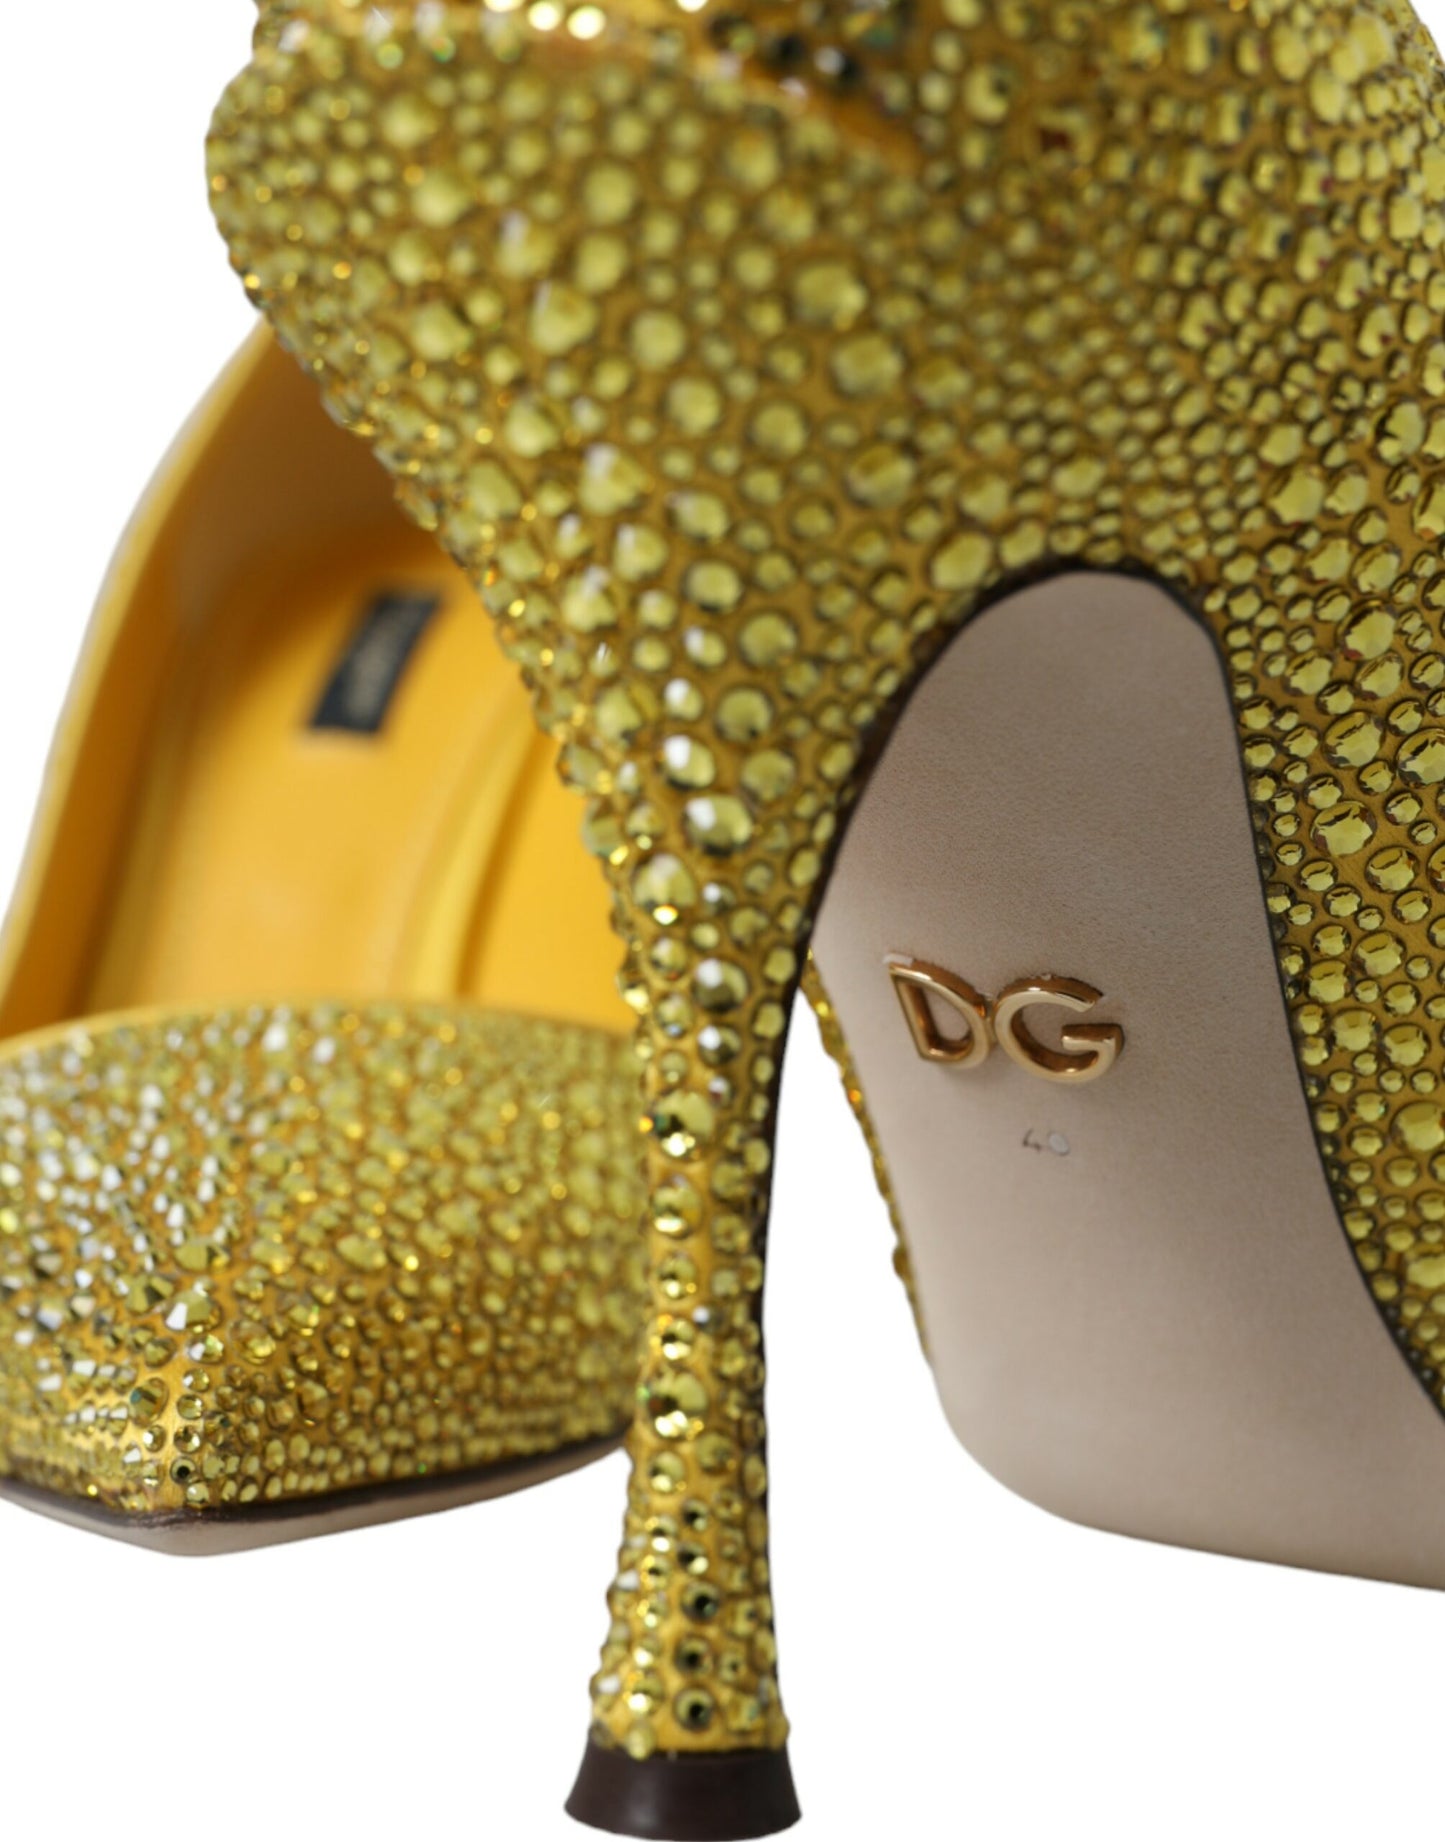 Yellow Strass Crystal Heels Pumps Shoes